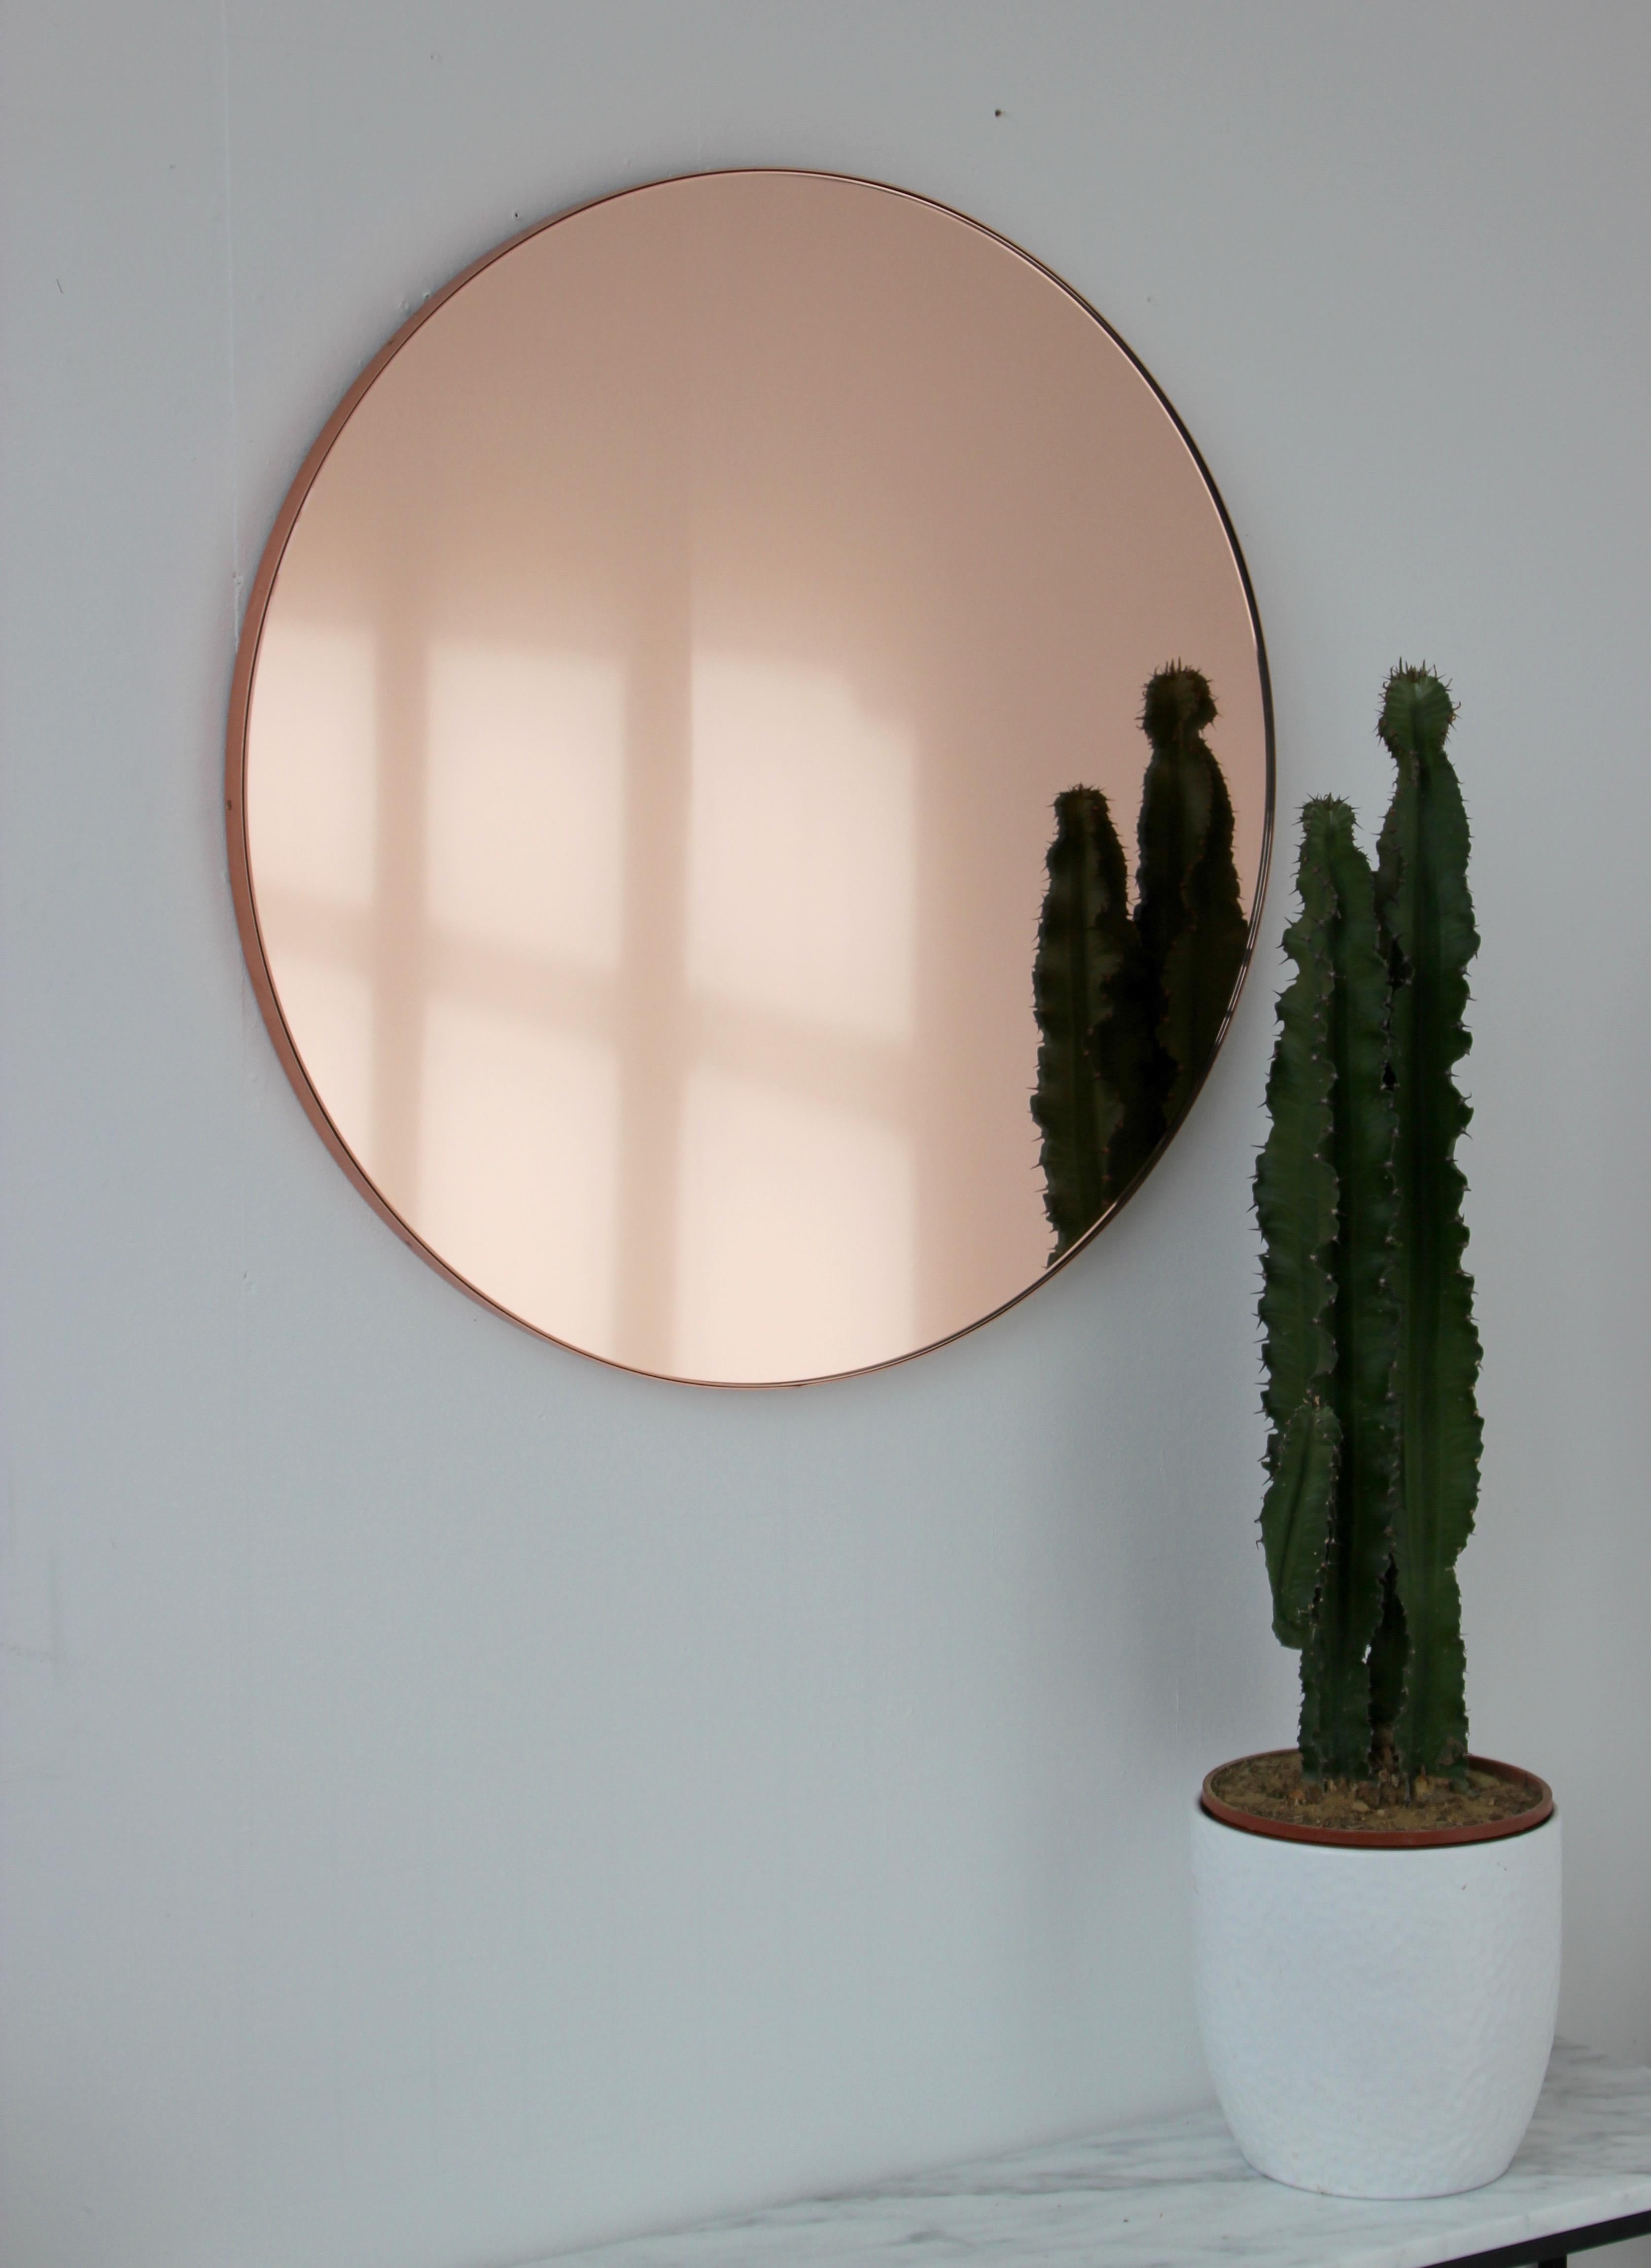 Contemporary Peach / Rose Gold tinted round mirror with a solid brushed copper frame. The detailing and finish, including visible copper plated screws, emphasise the craft and quality feel of the mirror. Designed and made in London, UK.

Our mirrors